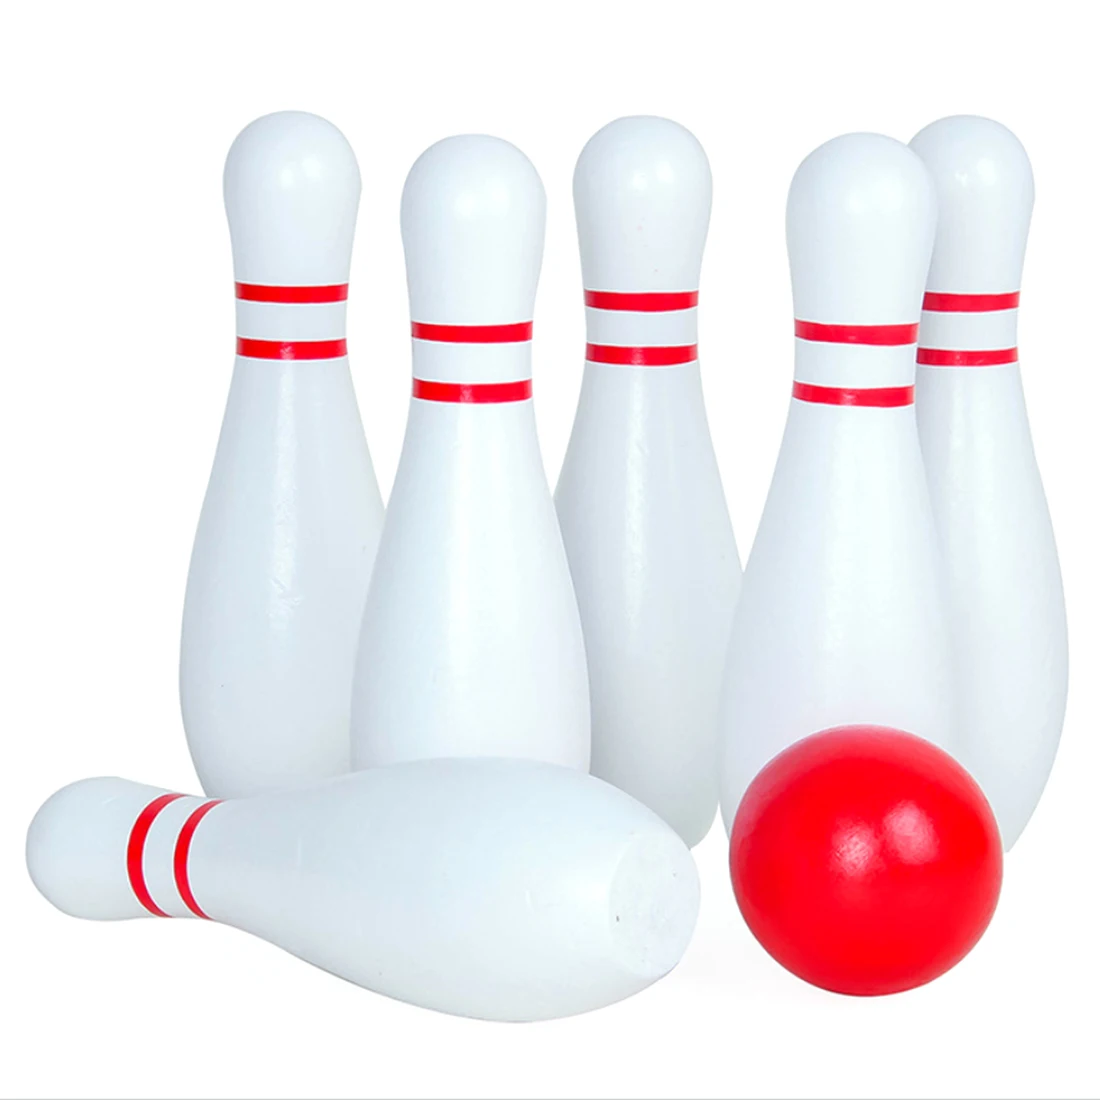 

Large Size Wooden Skittle Ball Indoor Bowling Game With 6 Bowling Pins Sports Toys For Kids Adults Drop Shipping